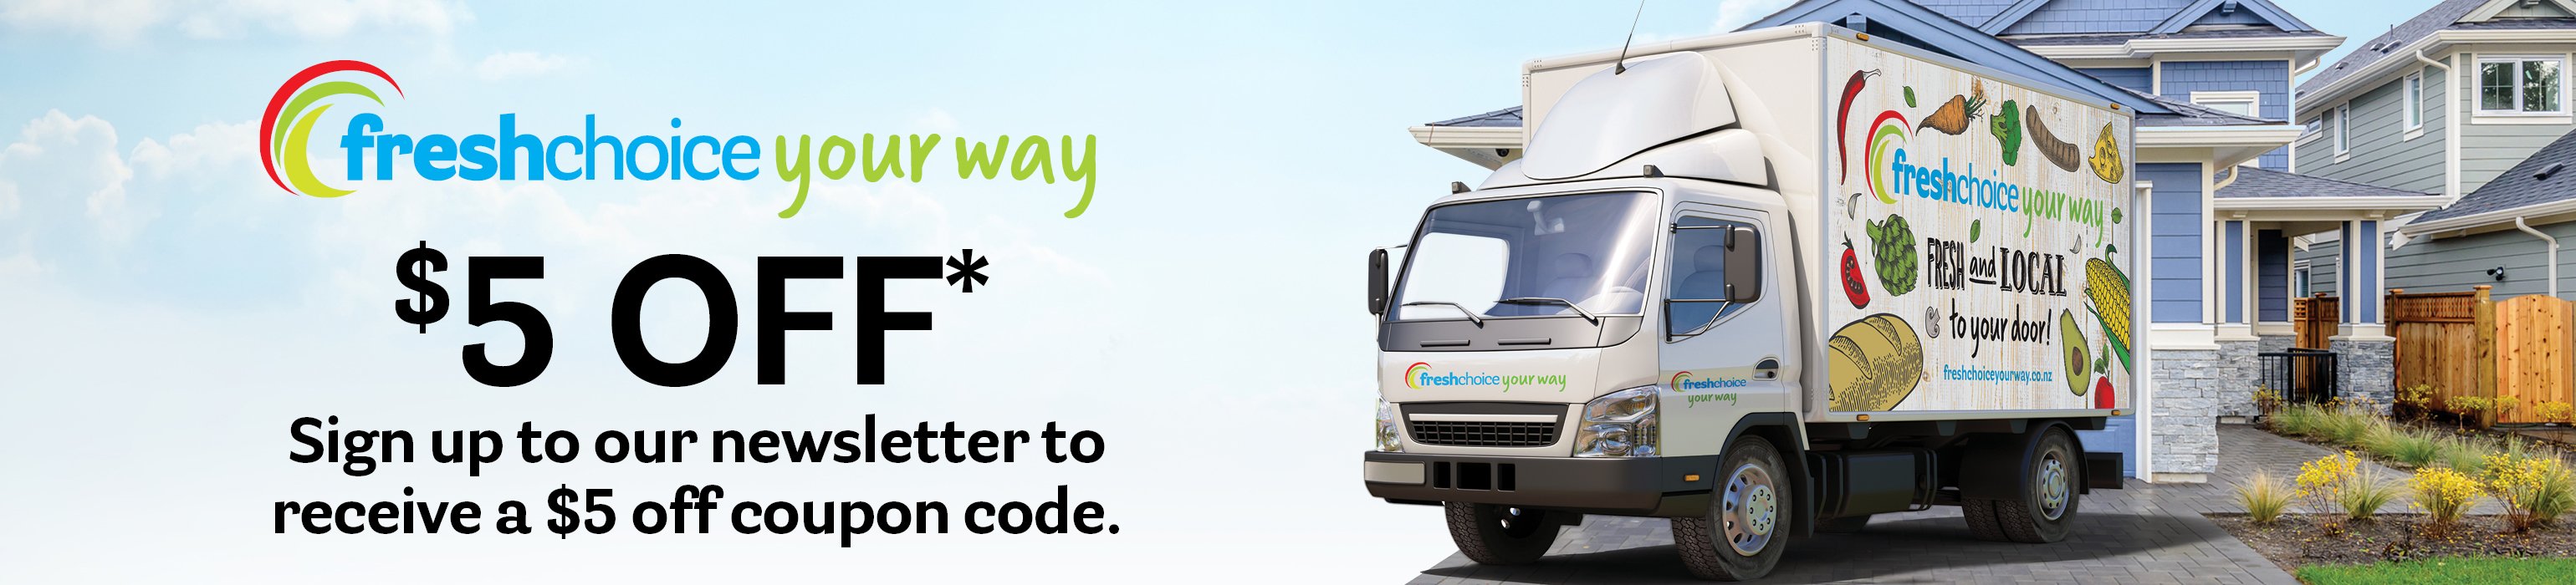 Email Sign Up promo image with delivery truck